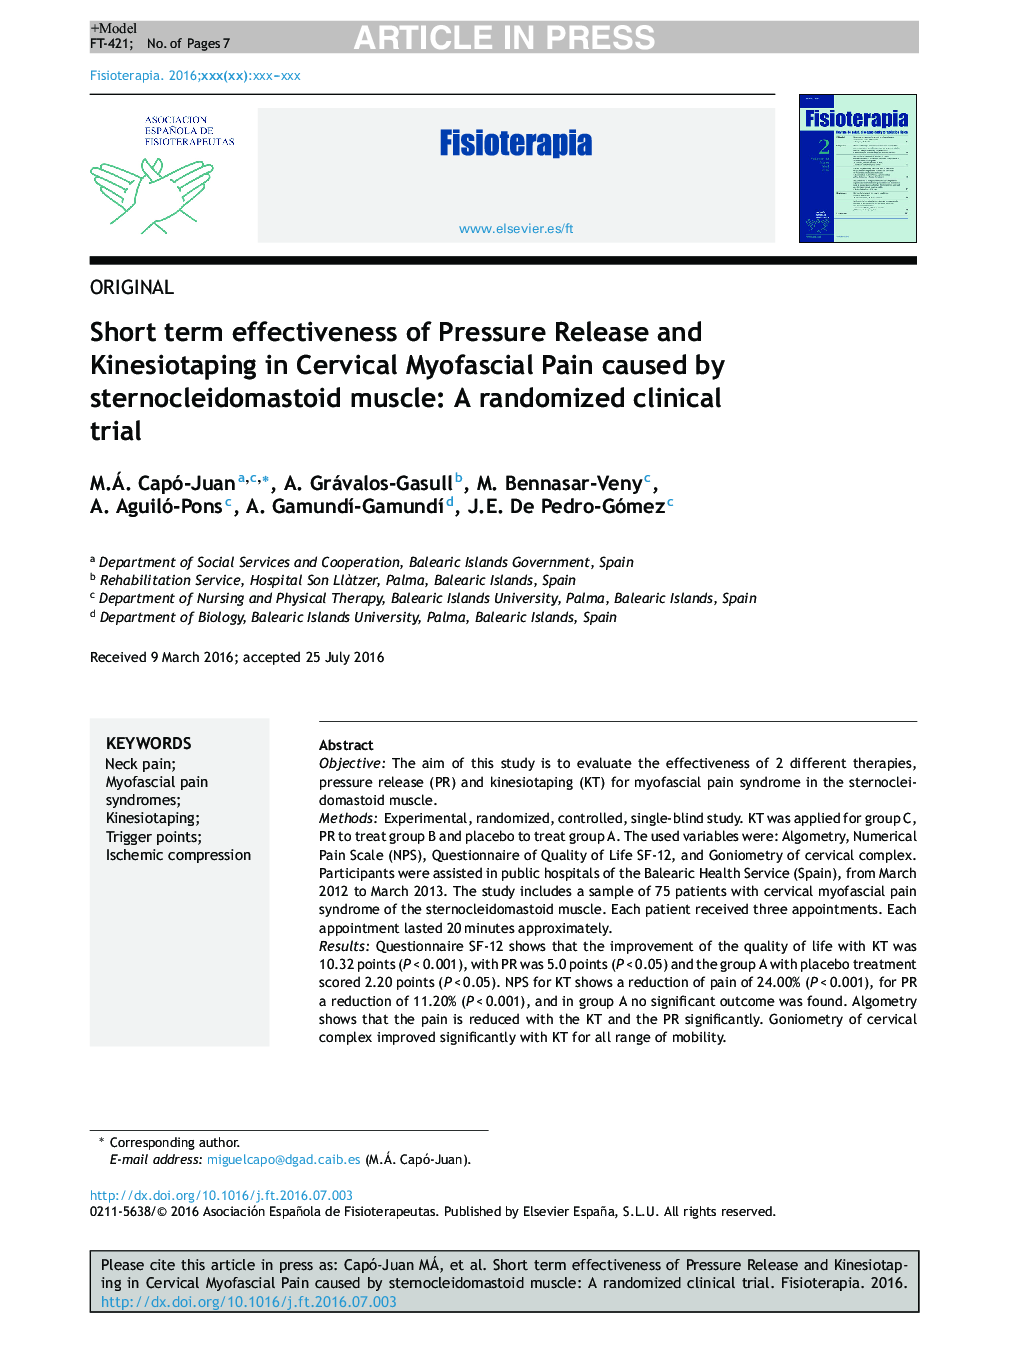 Short term effectiveness of Pressure Release and Kinesiotaping in Cervical Myofascial Pain caused by sternocleidomastoid muscle: A randomized clinical trial